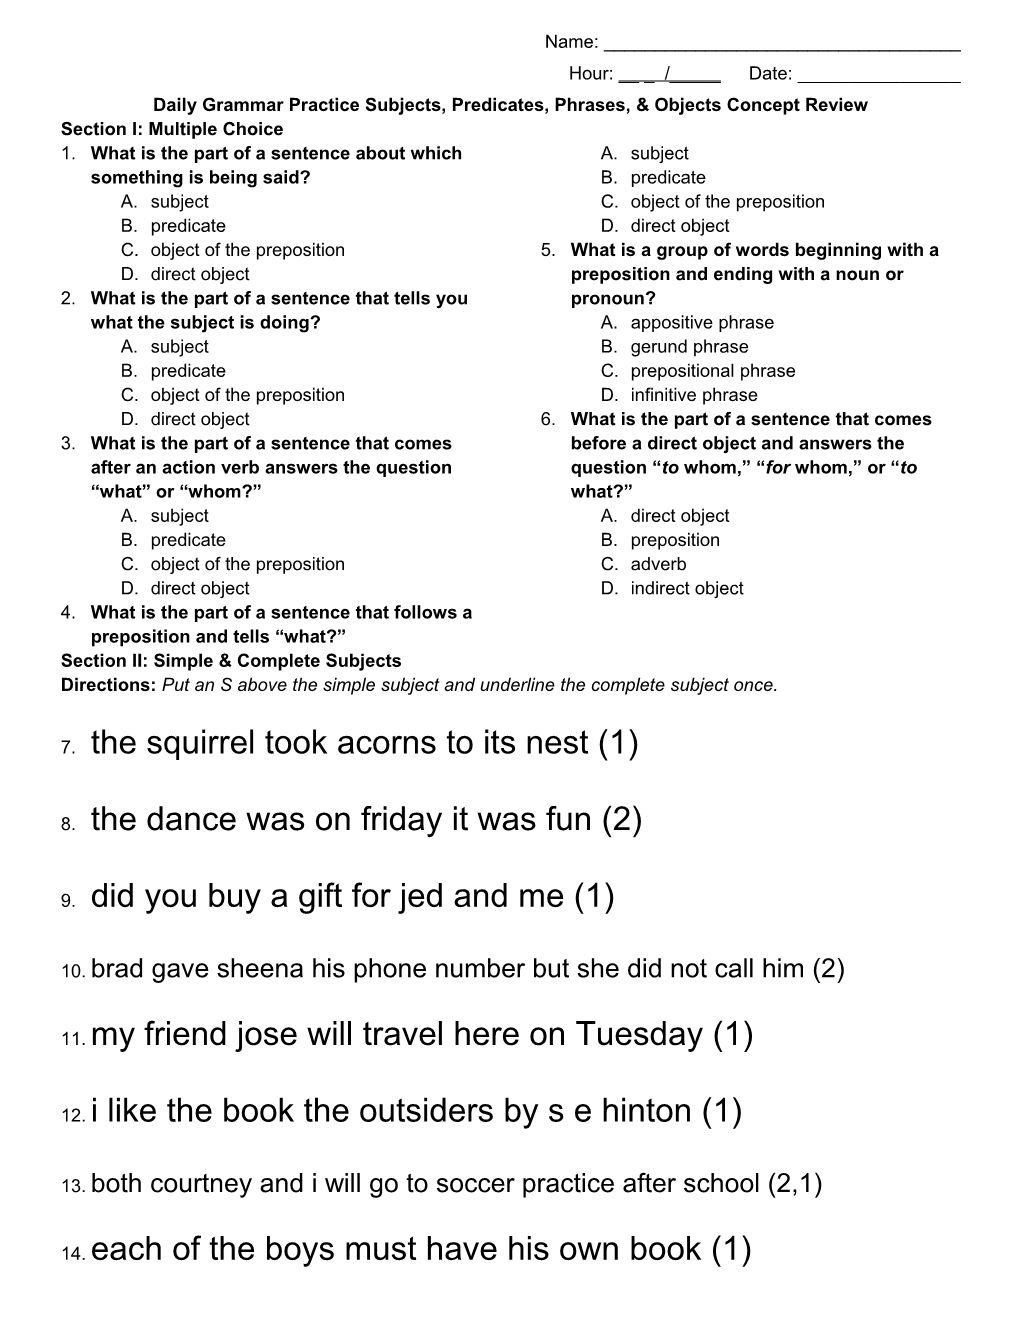 Daily Grammar Practice Subjects, Predicates, Phrases, & Objectsconcept Review